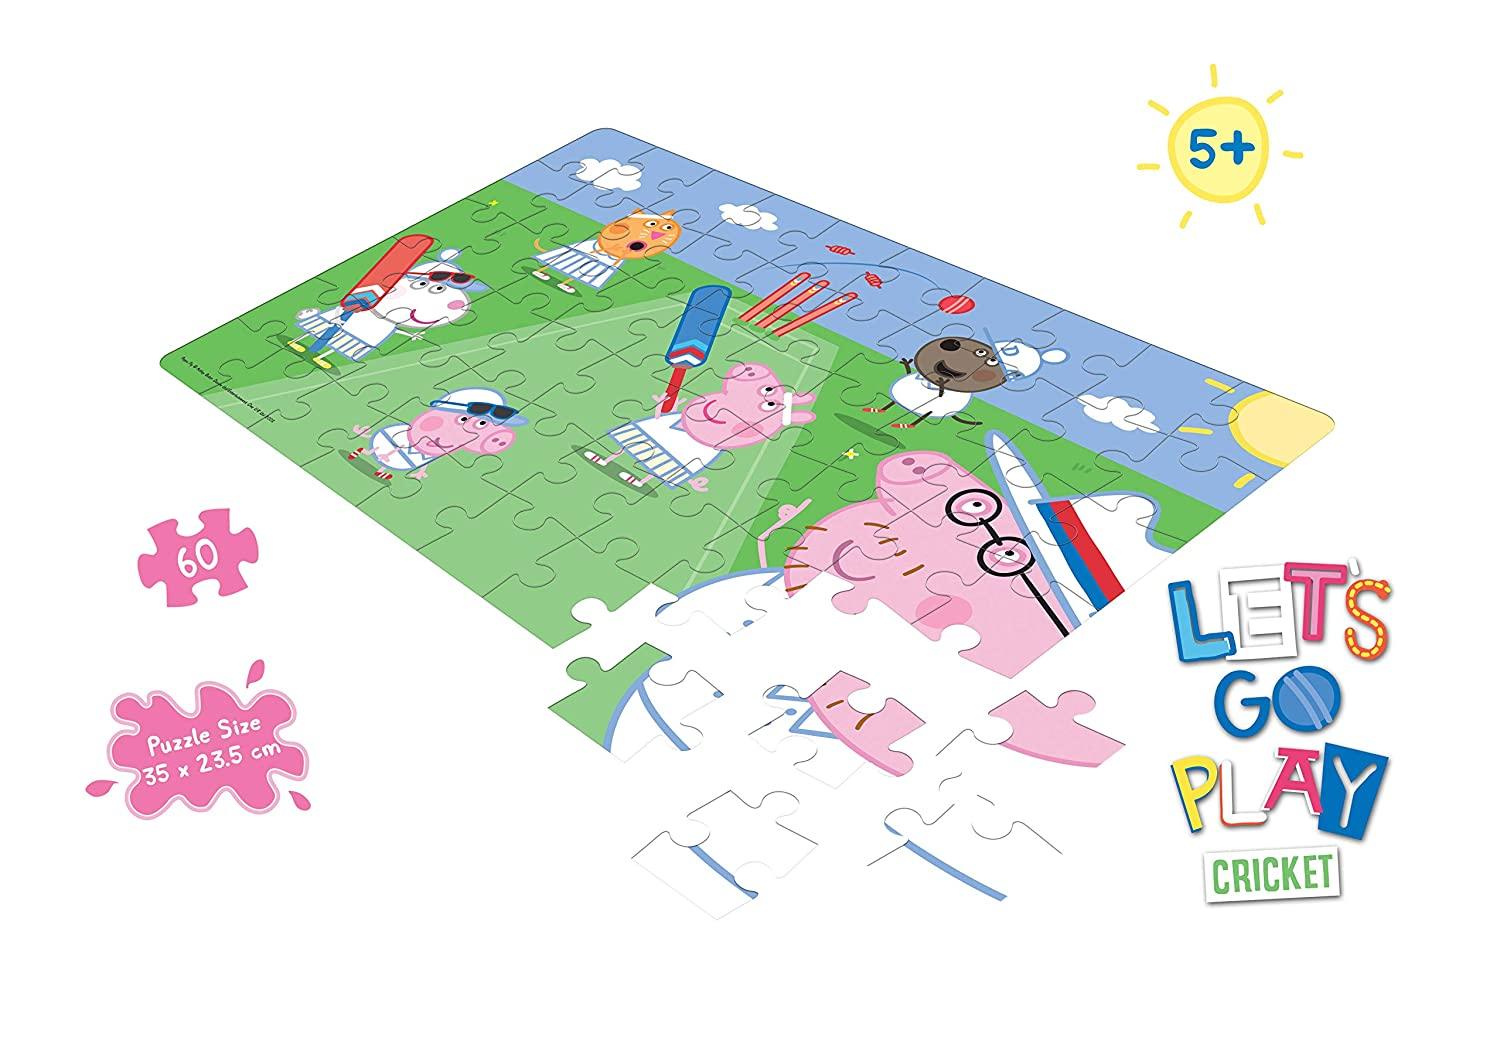 Frank Peppa Pig: Lets Go Play Cricket Puzzle For 5 Year Old Kids And Above